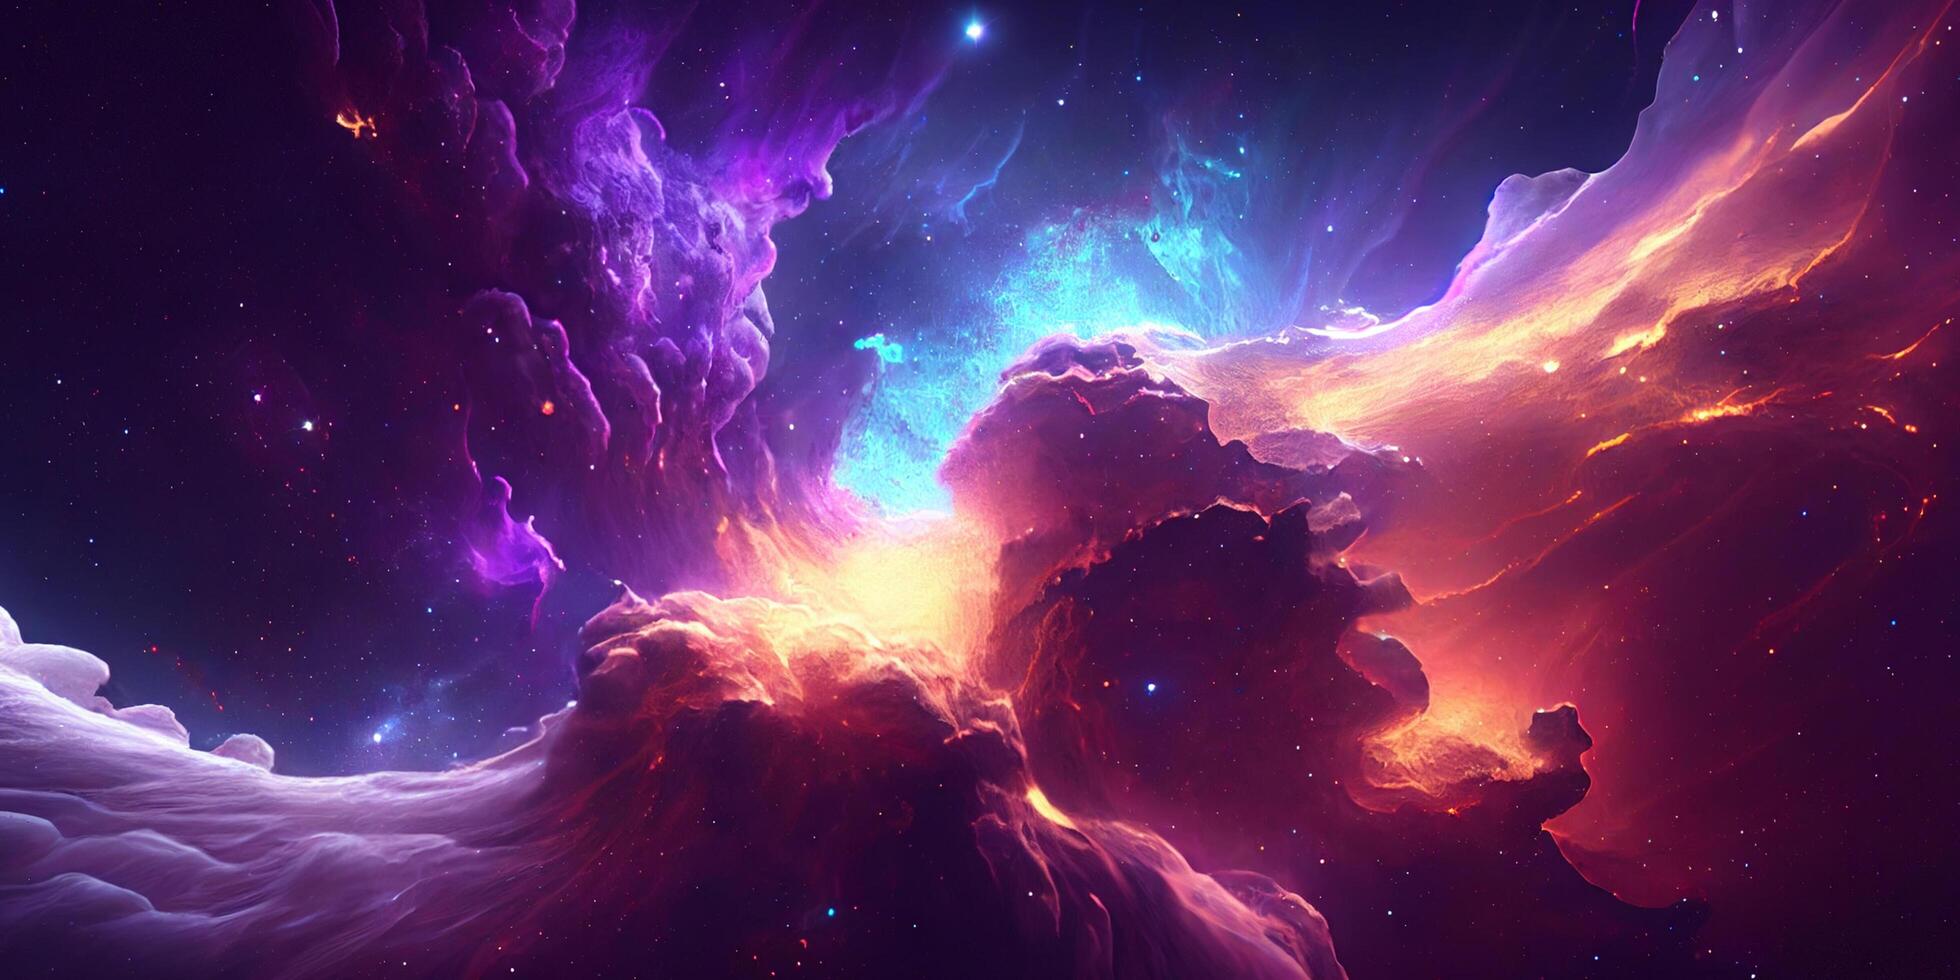 Abstract outer space endless nebula galaxy background with clouds and neon lighting in the sky. . photo